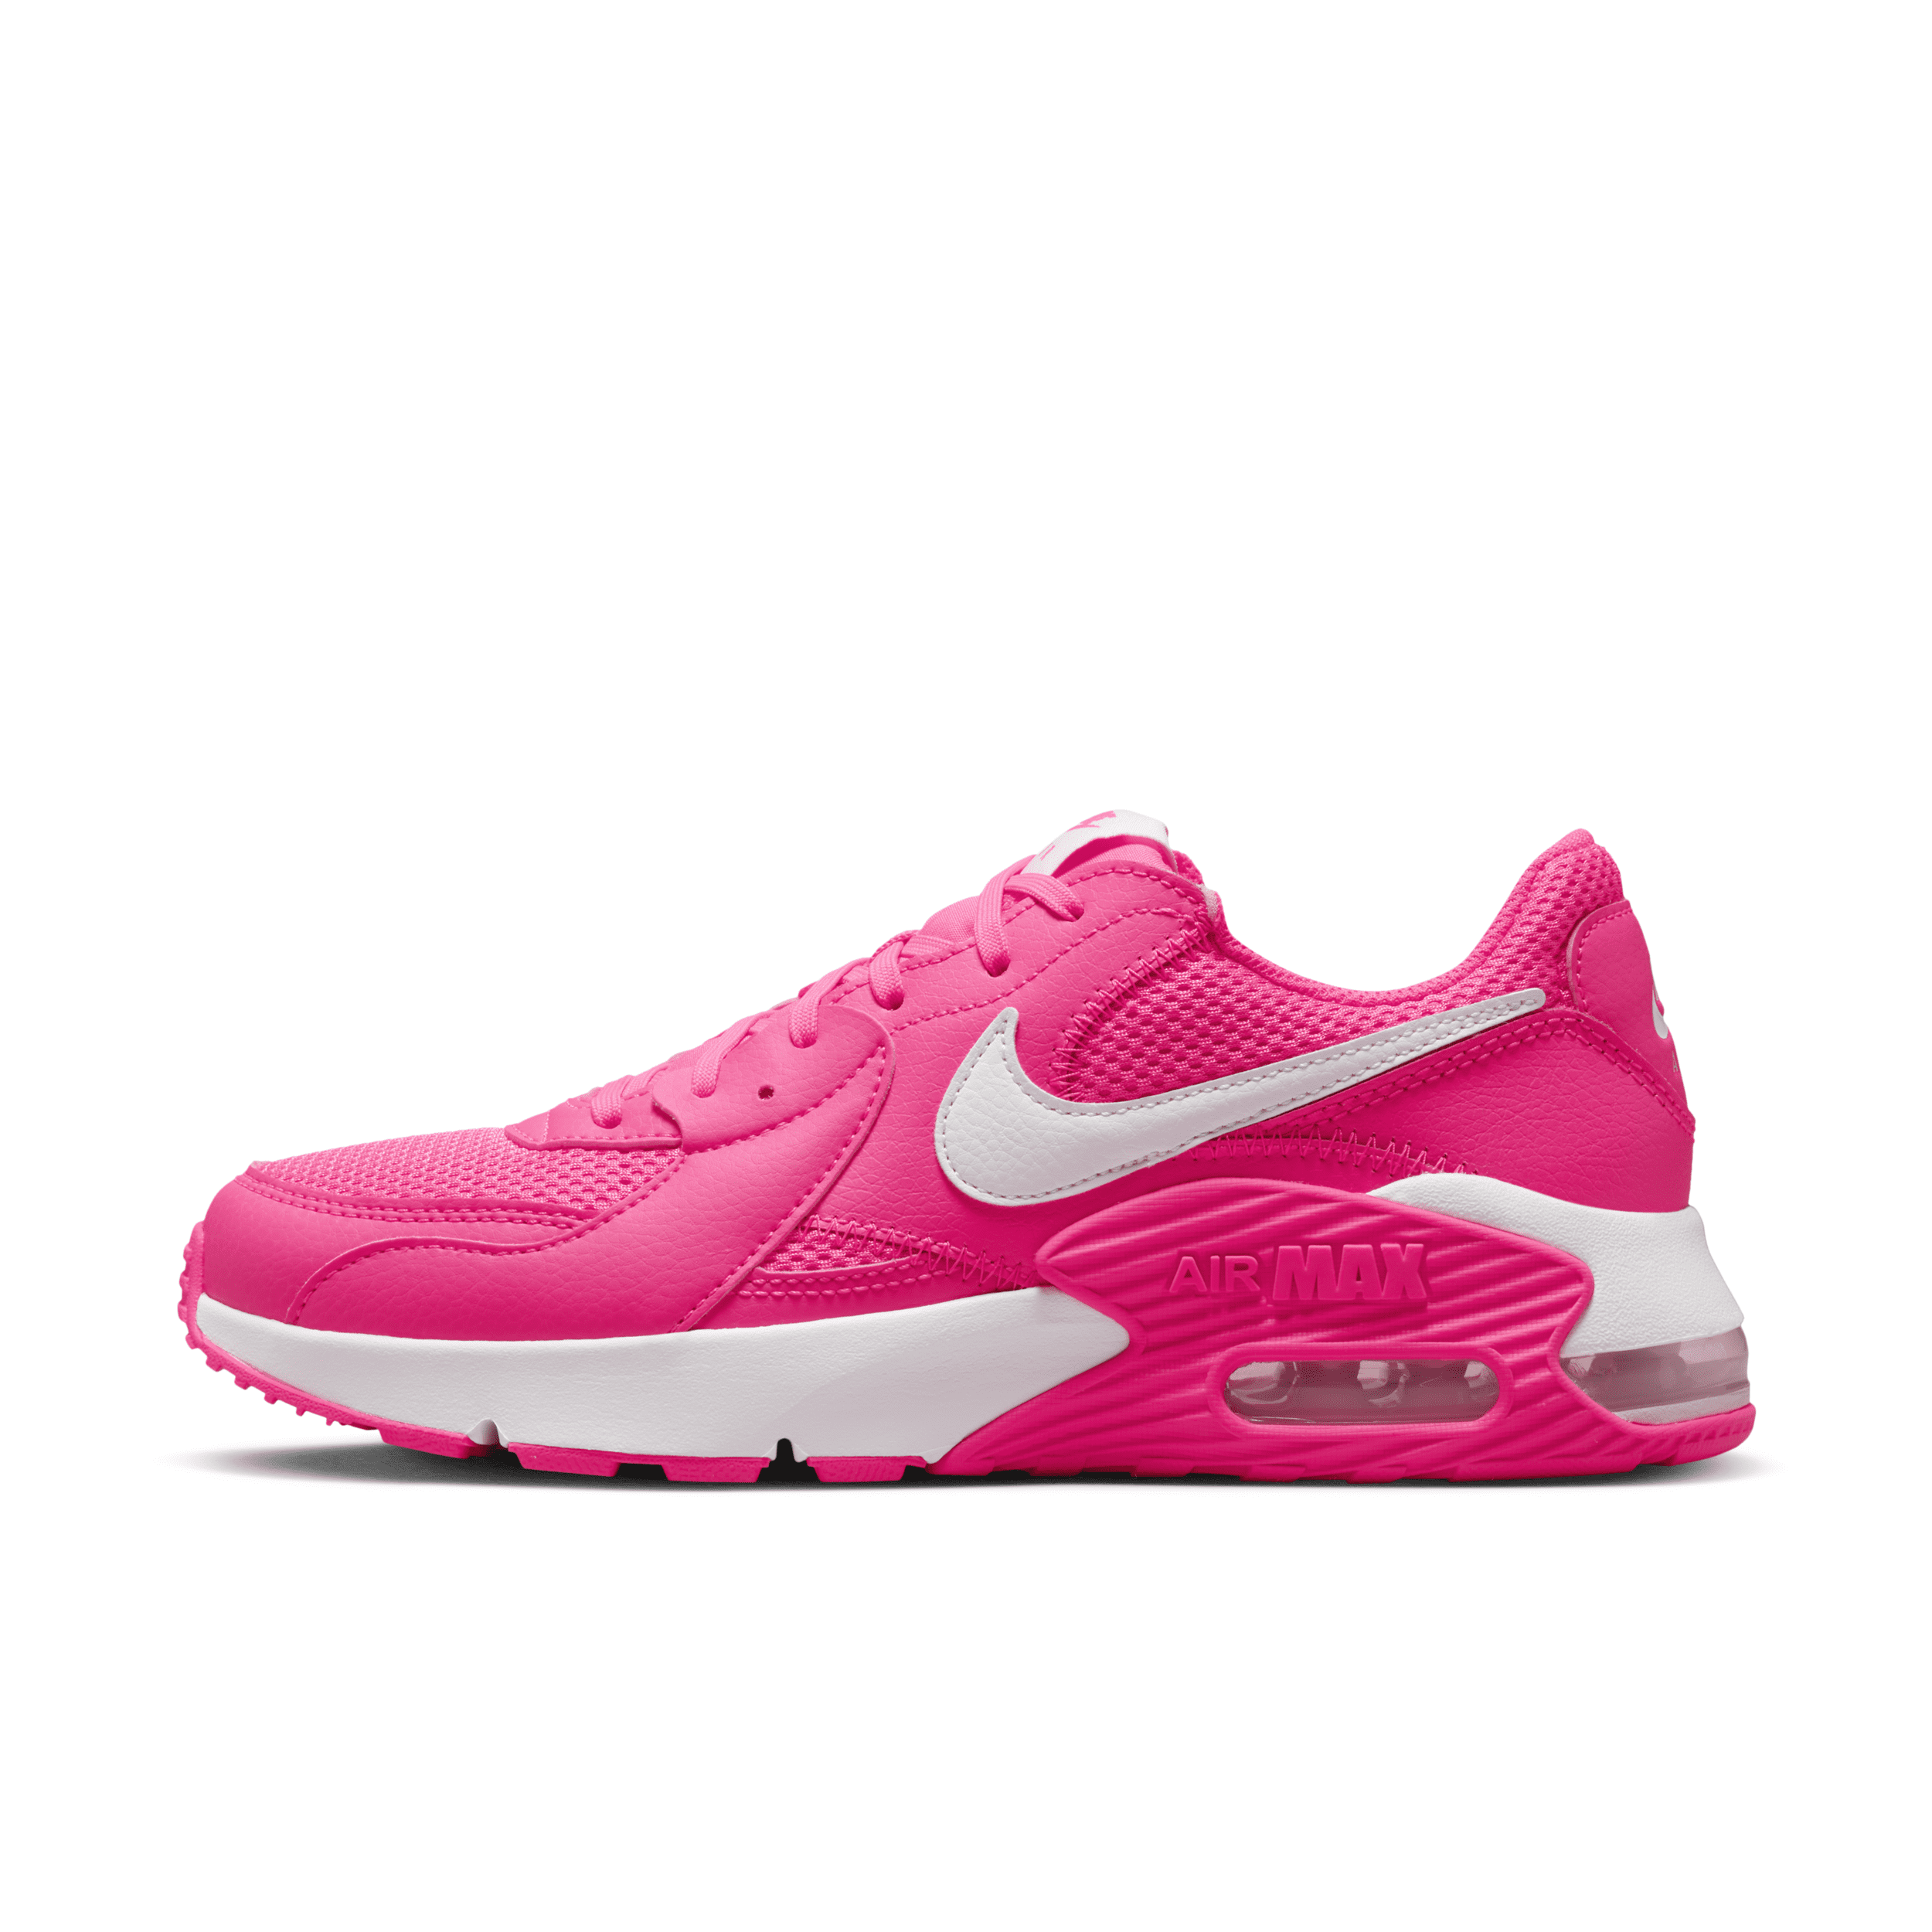 relaxed tonight To meditation Nike Women's Air Max Excee Shoes In Hyper Pink/clear/white | ModeSens